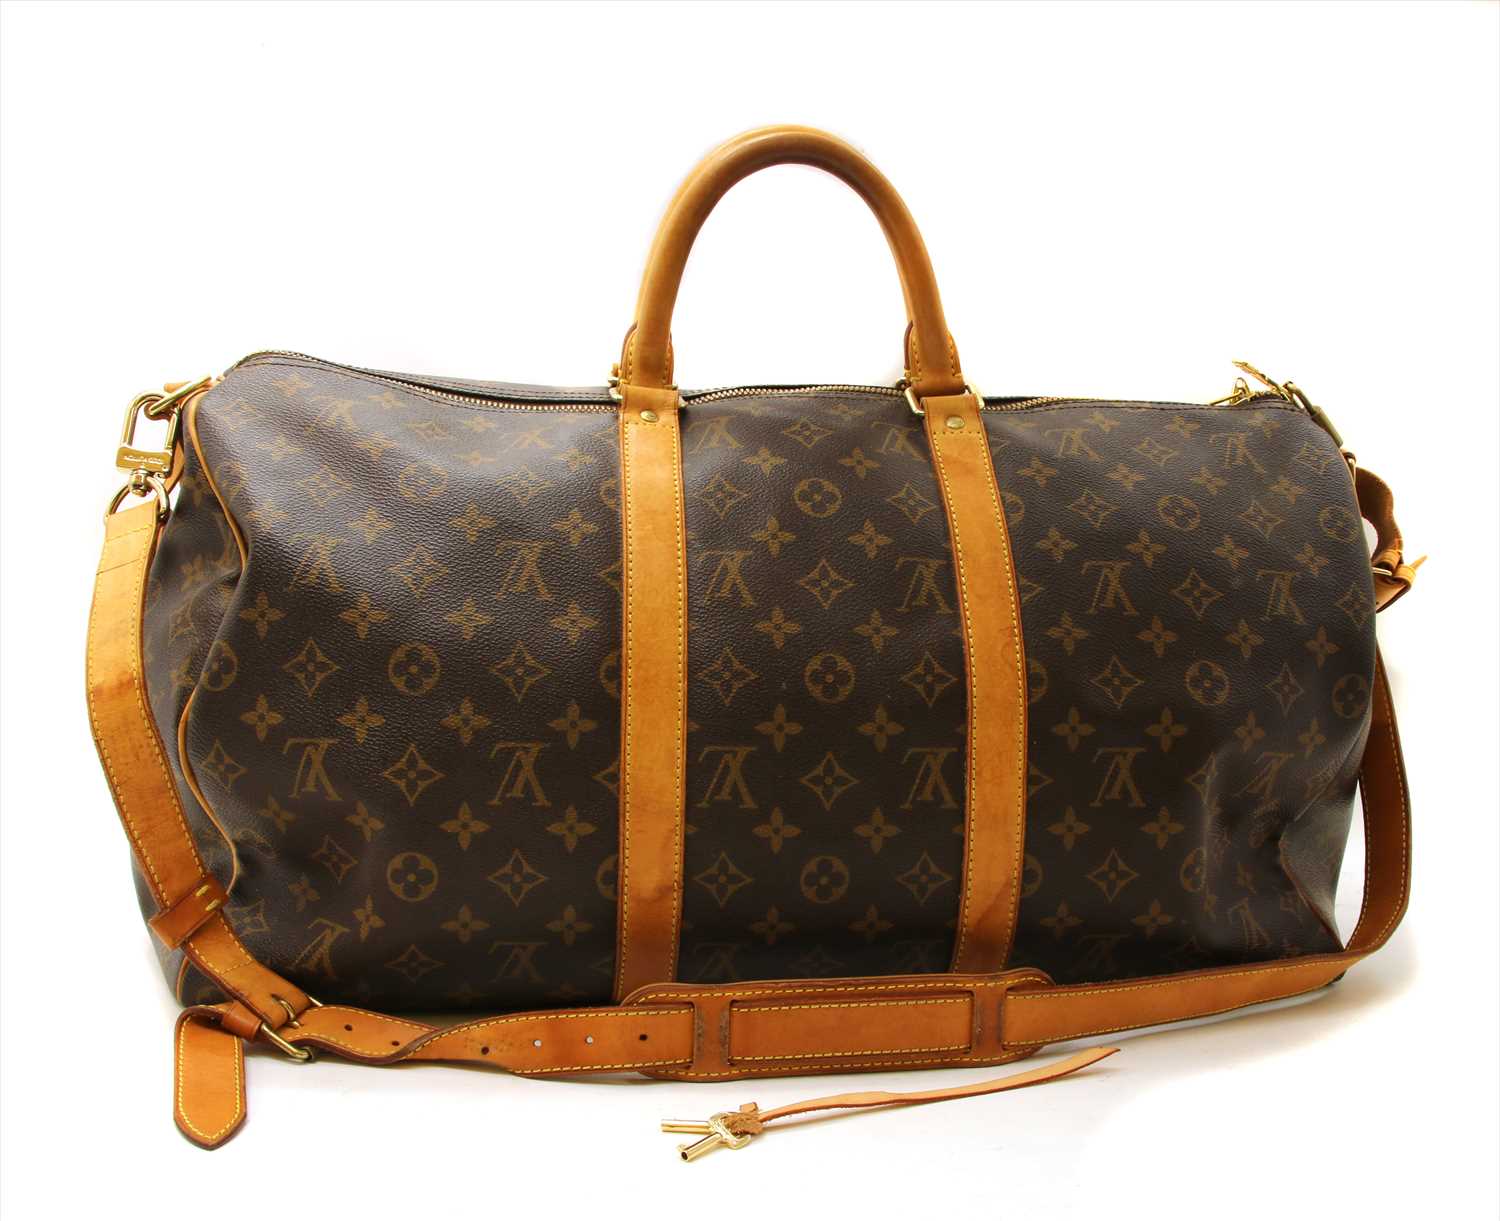 Sold at Auction: (2) LOUIS VUITTON KEEPALL 50 & 45 TRAVEL BAGS